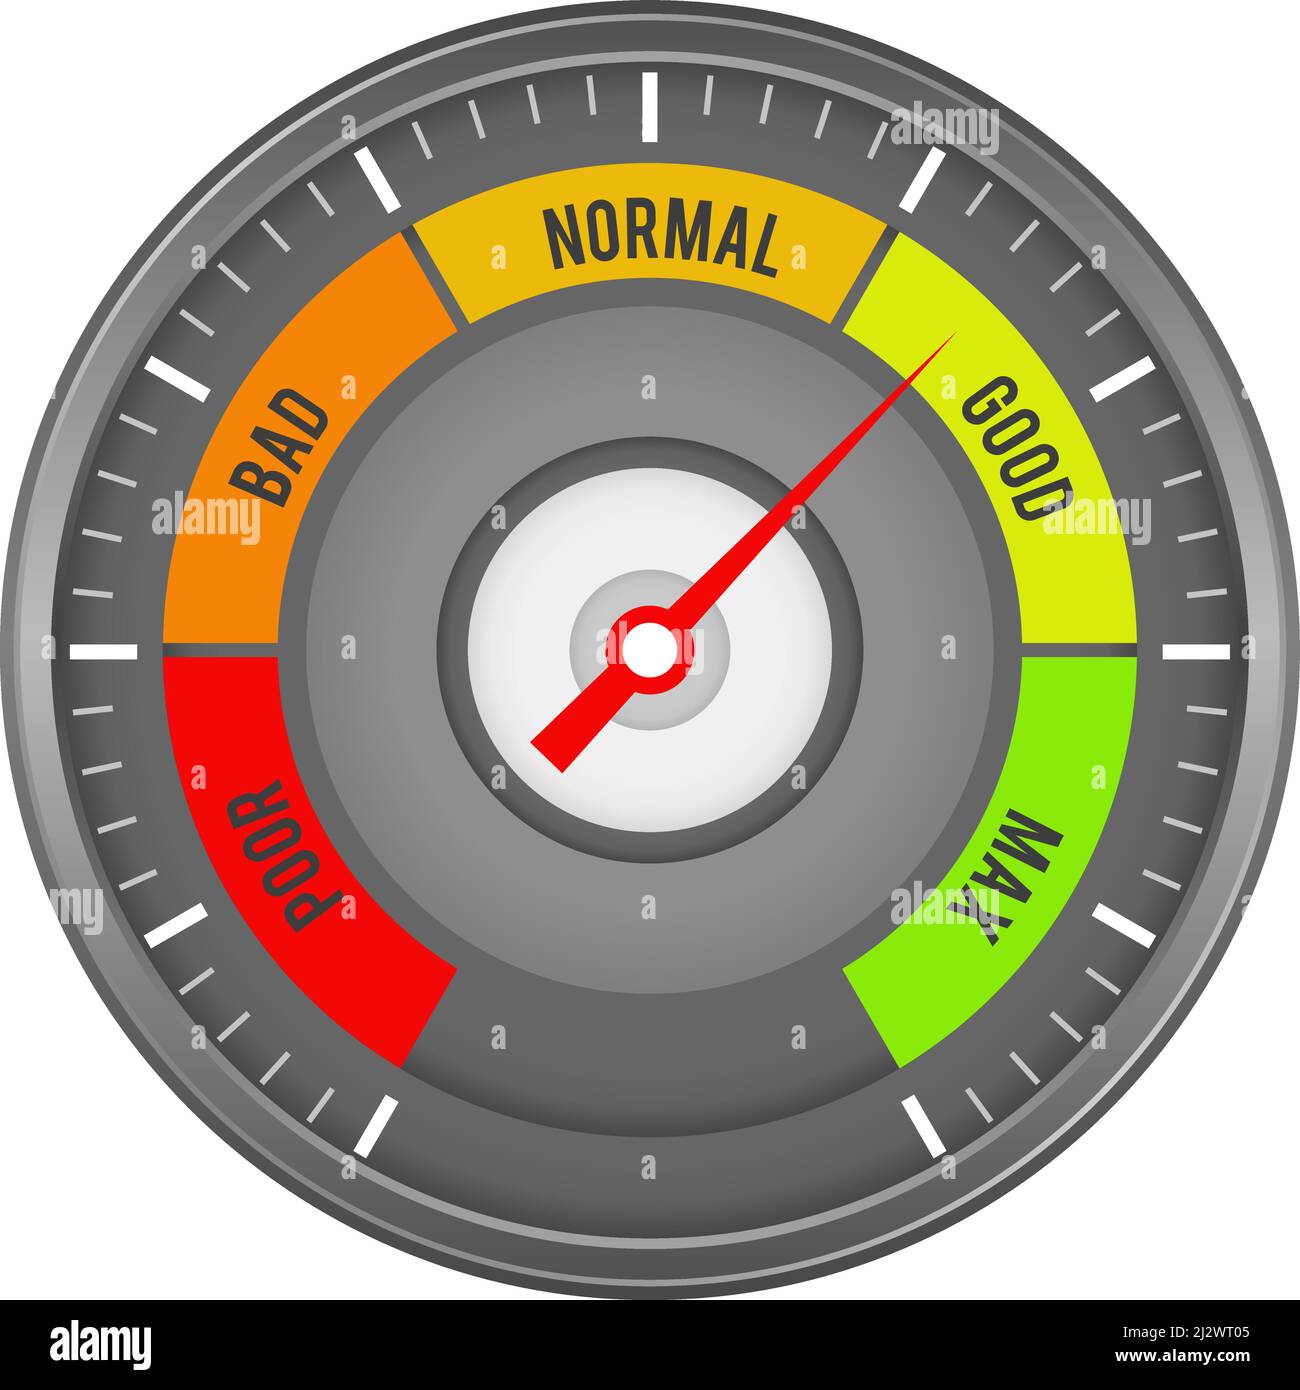 Perfomance indicator. Control panel element. Rating meter Stock Vector